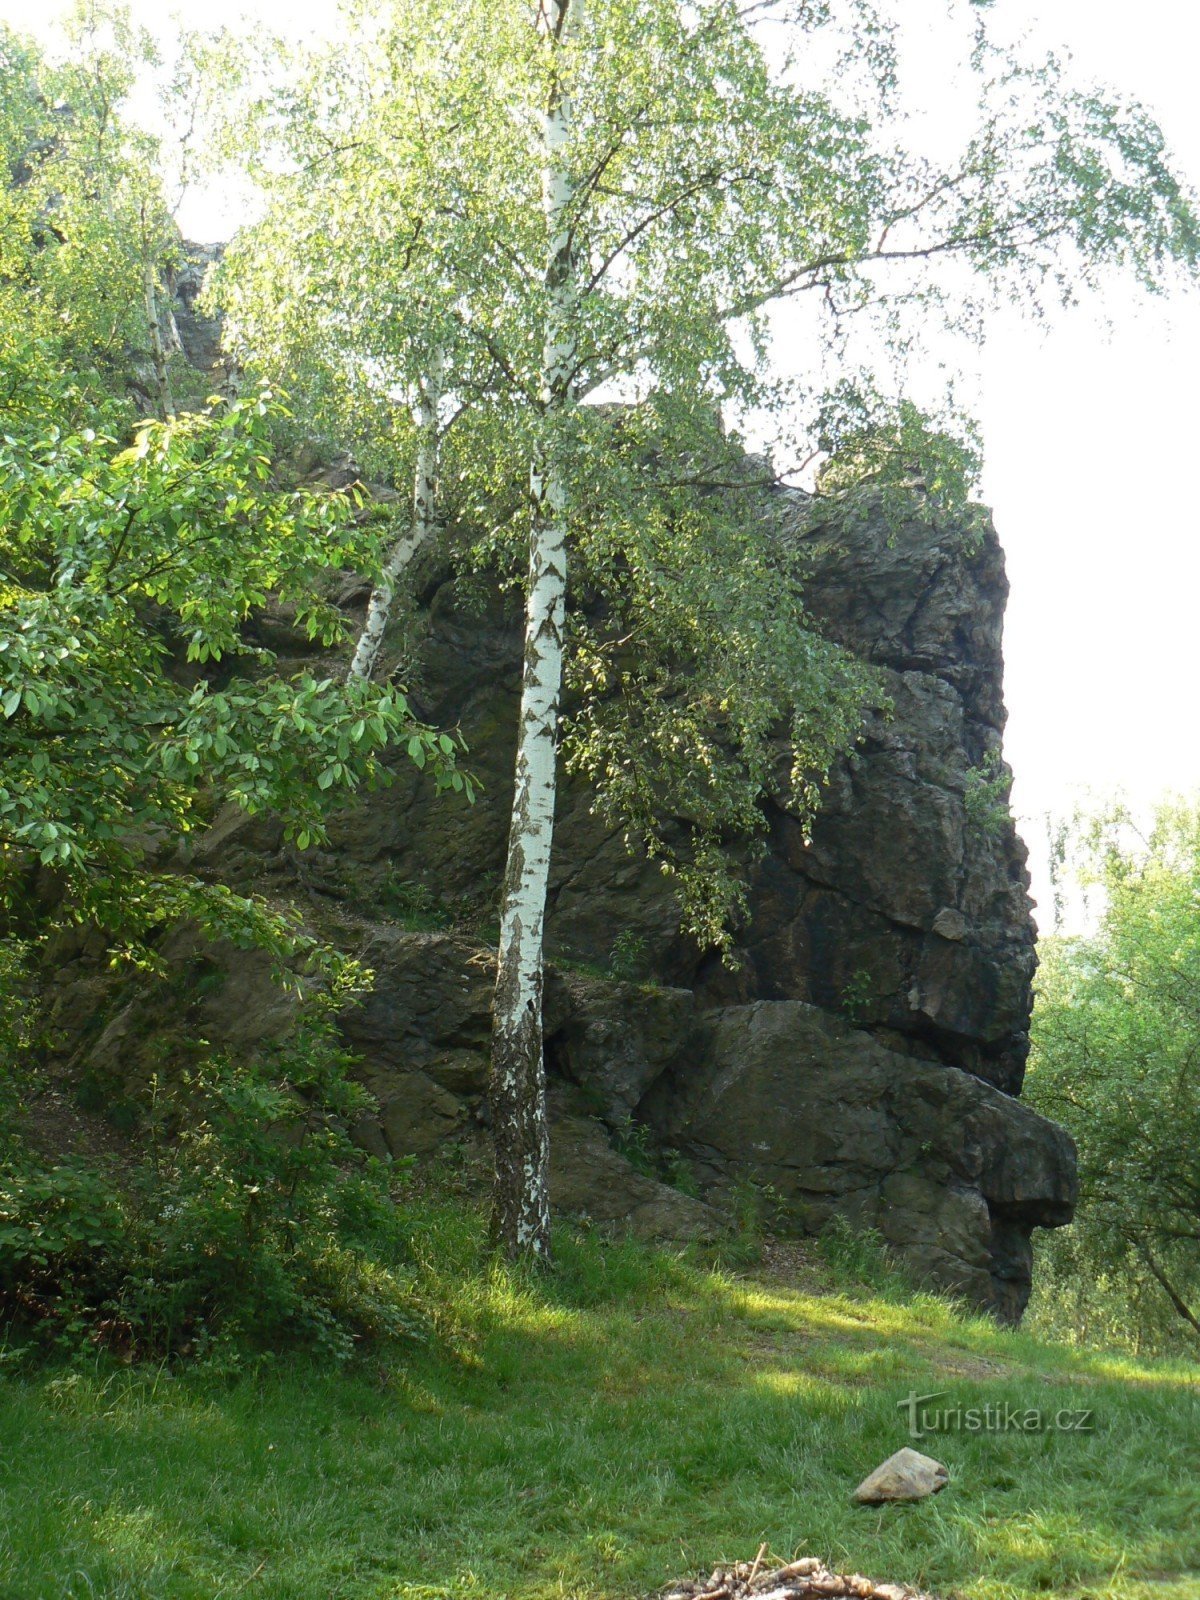 A view of the rock formation before the final climb